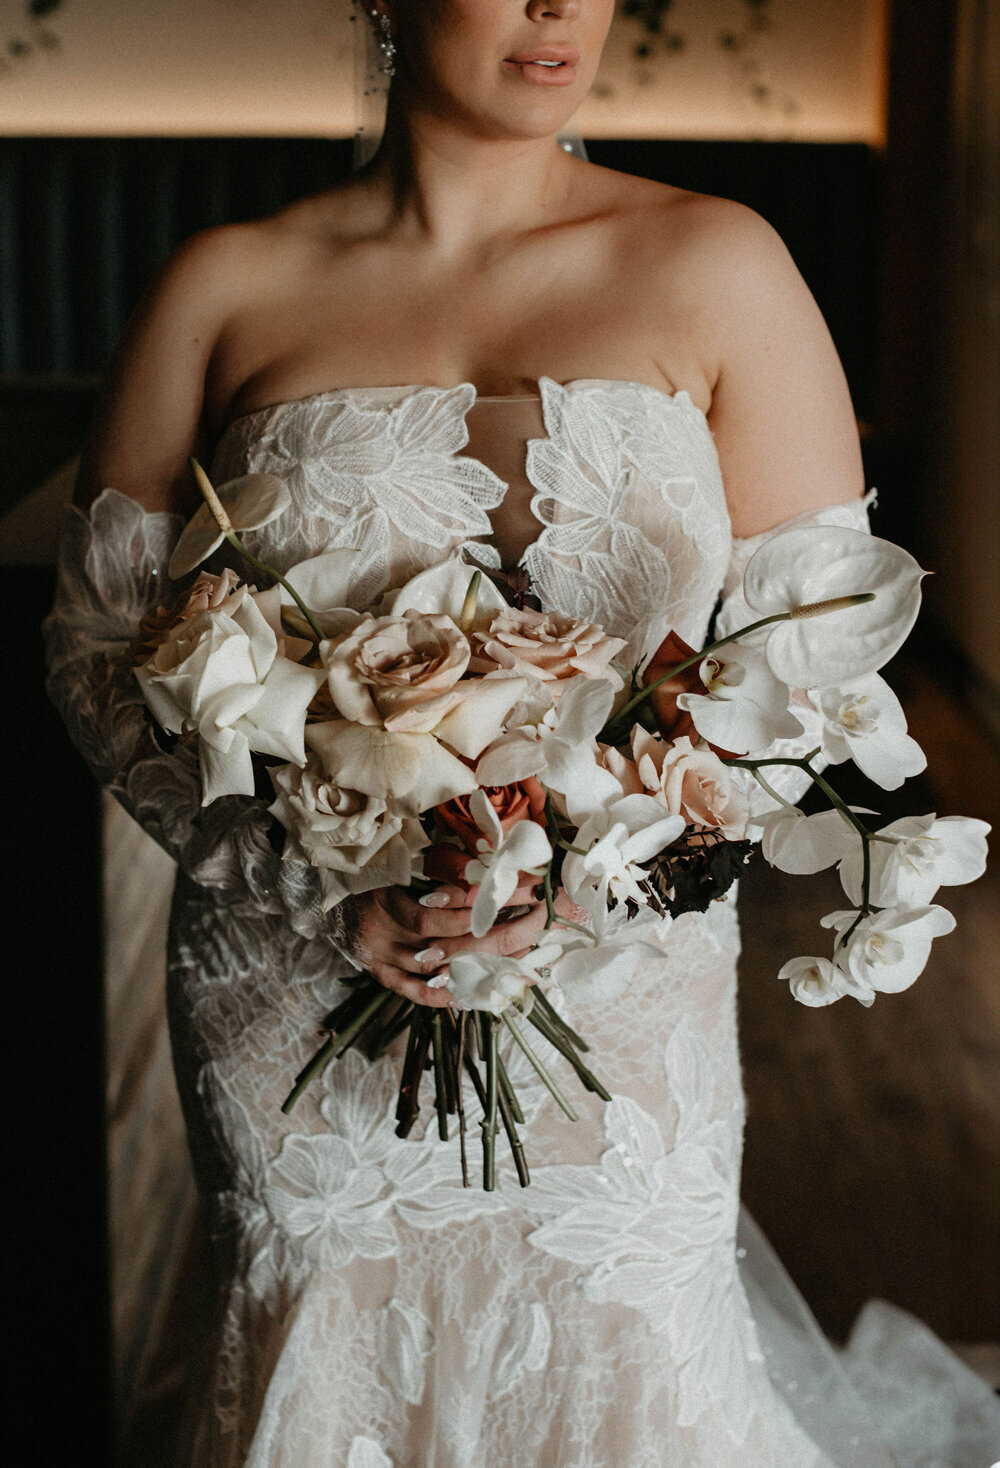 Bride posing with her lace wedding gown and elegant bouquet.